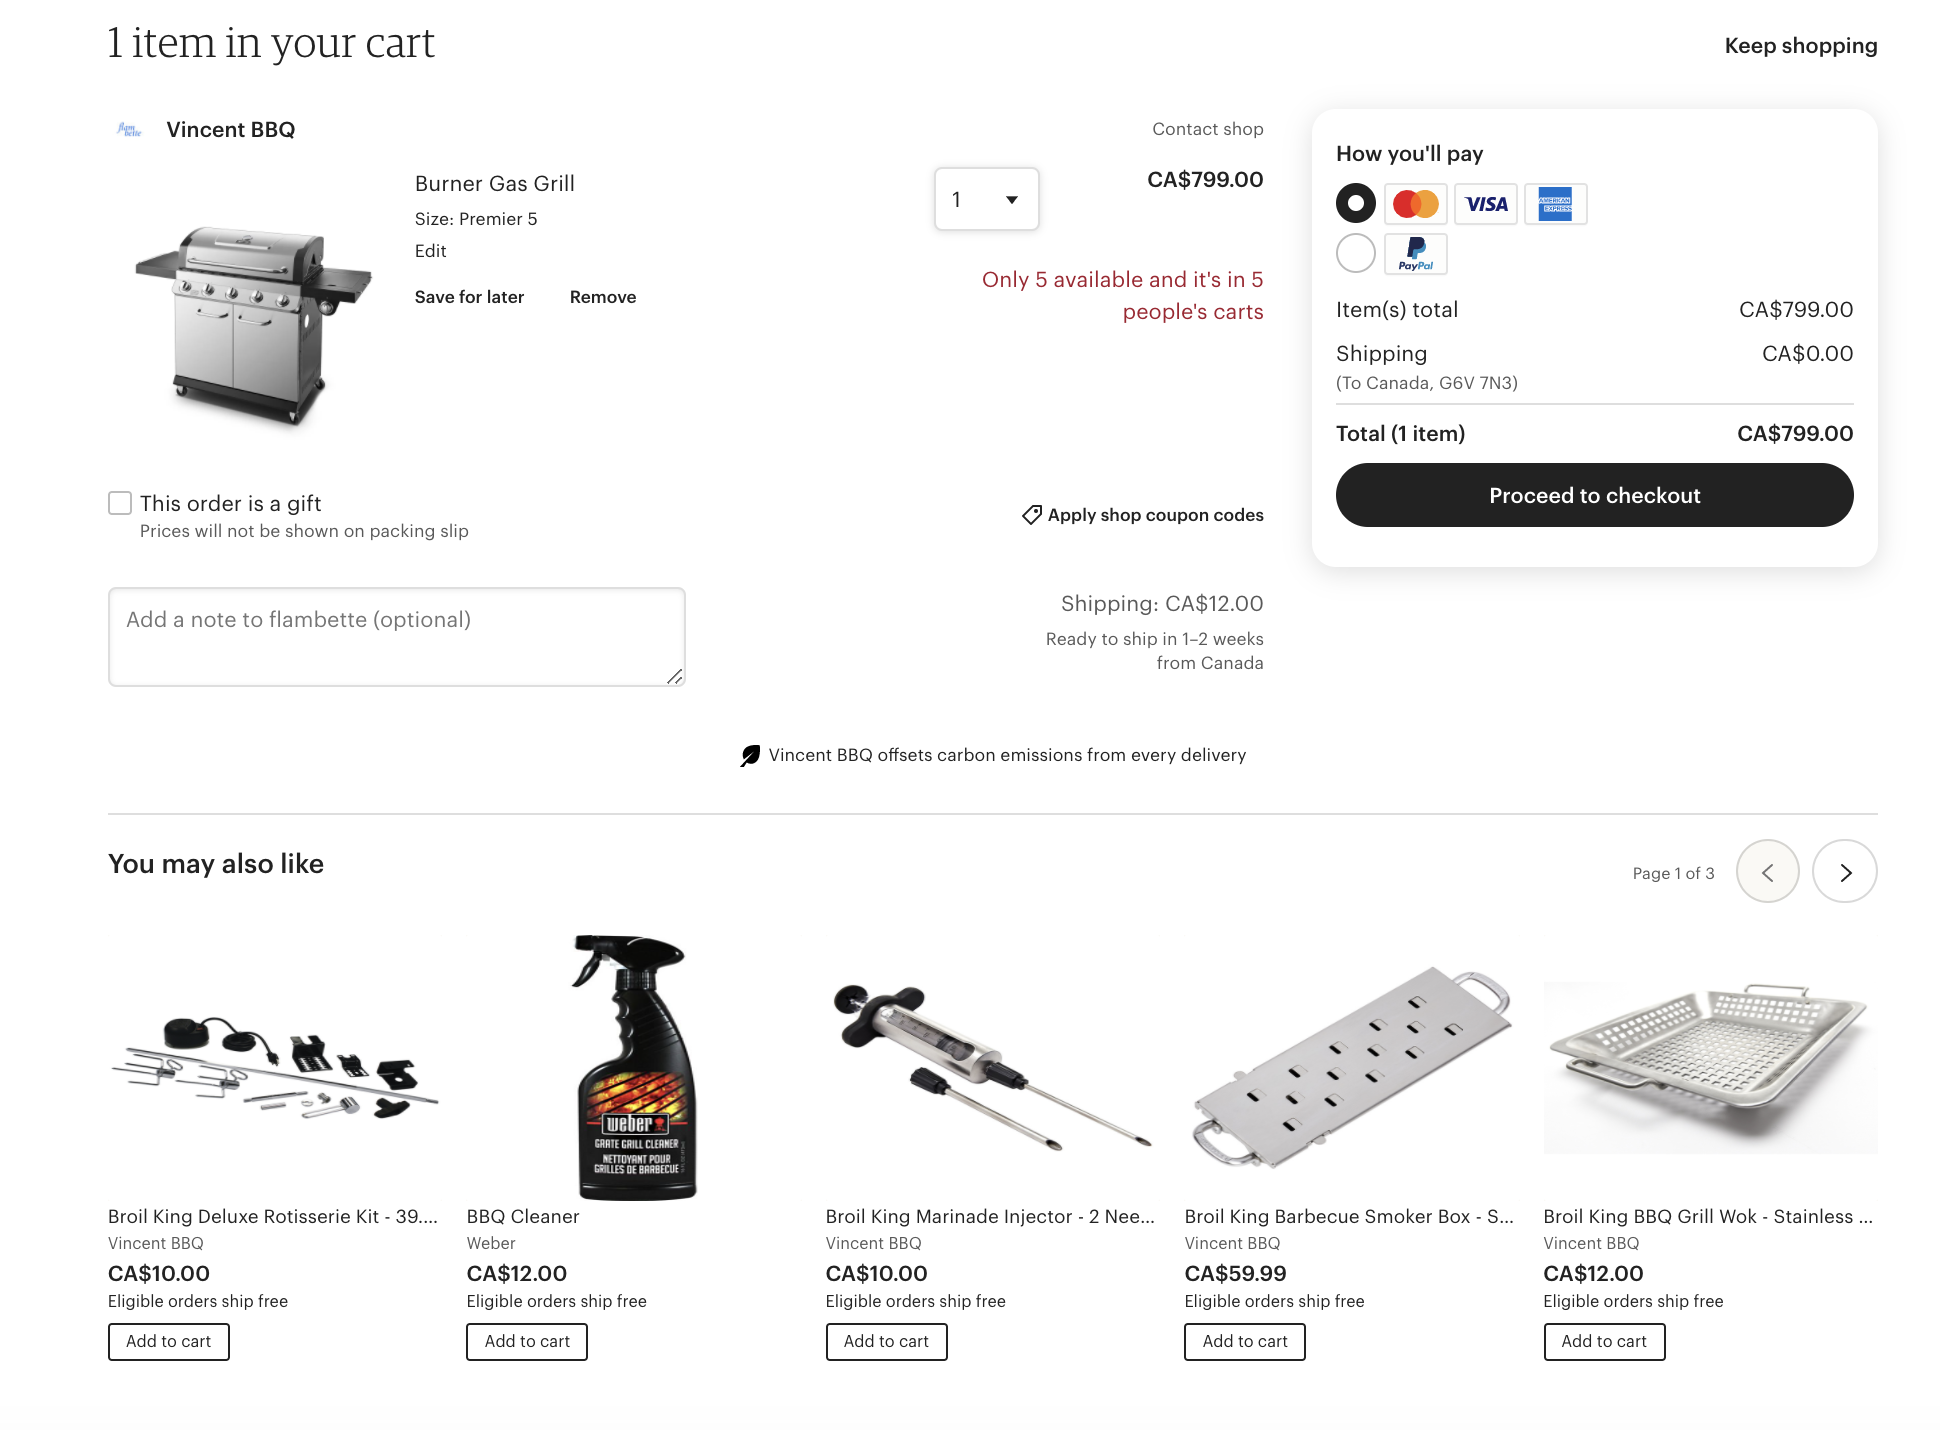 Product recommendations in the shopping cart